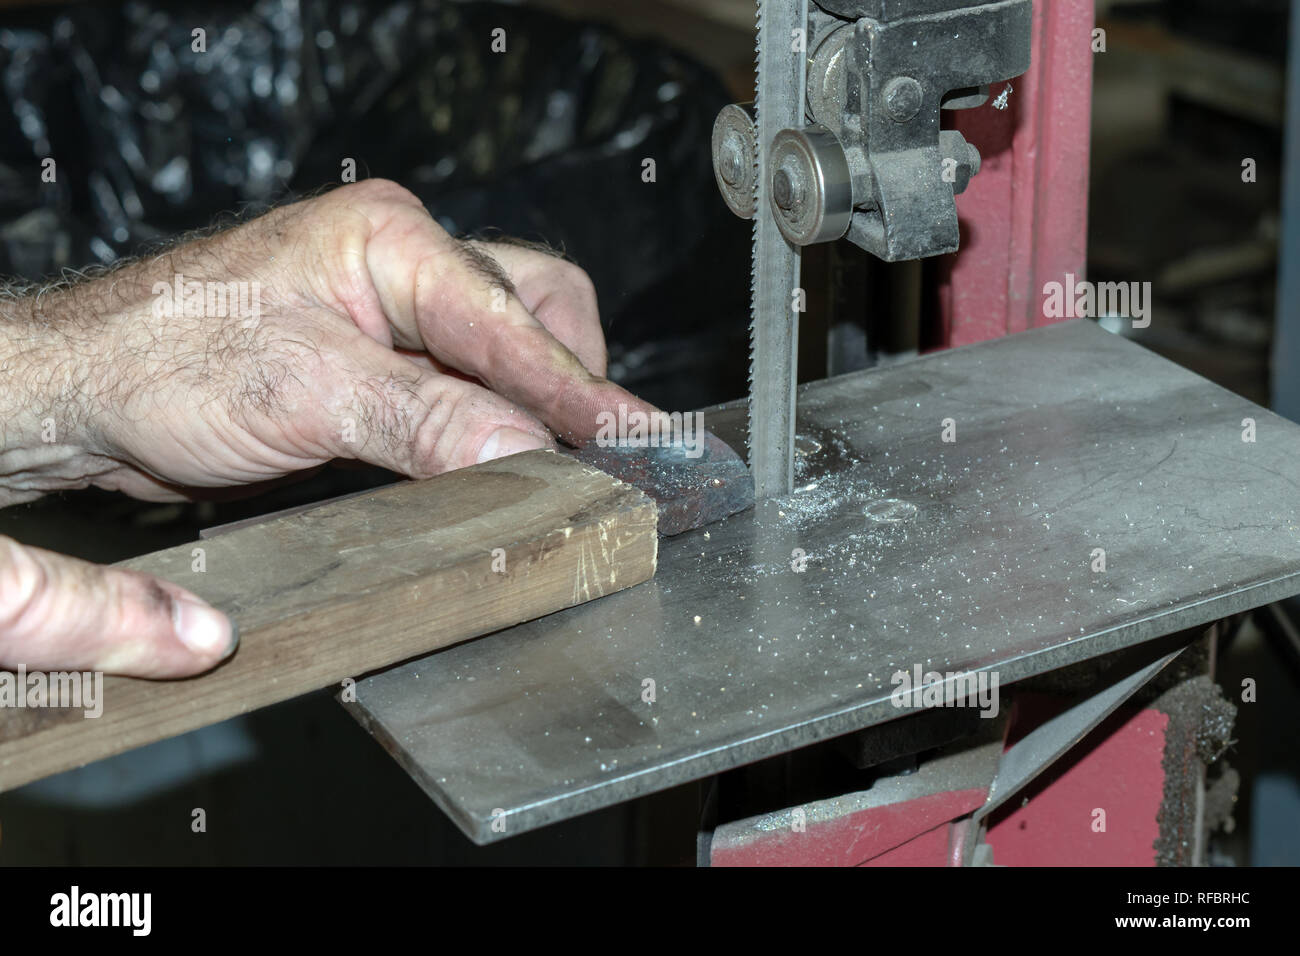 The metal worker carefully shapes a metal piece using a band saw for cutting. A bokeh background was captured. Stock Photo